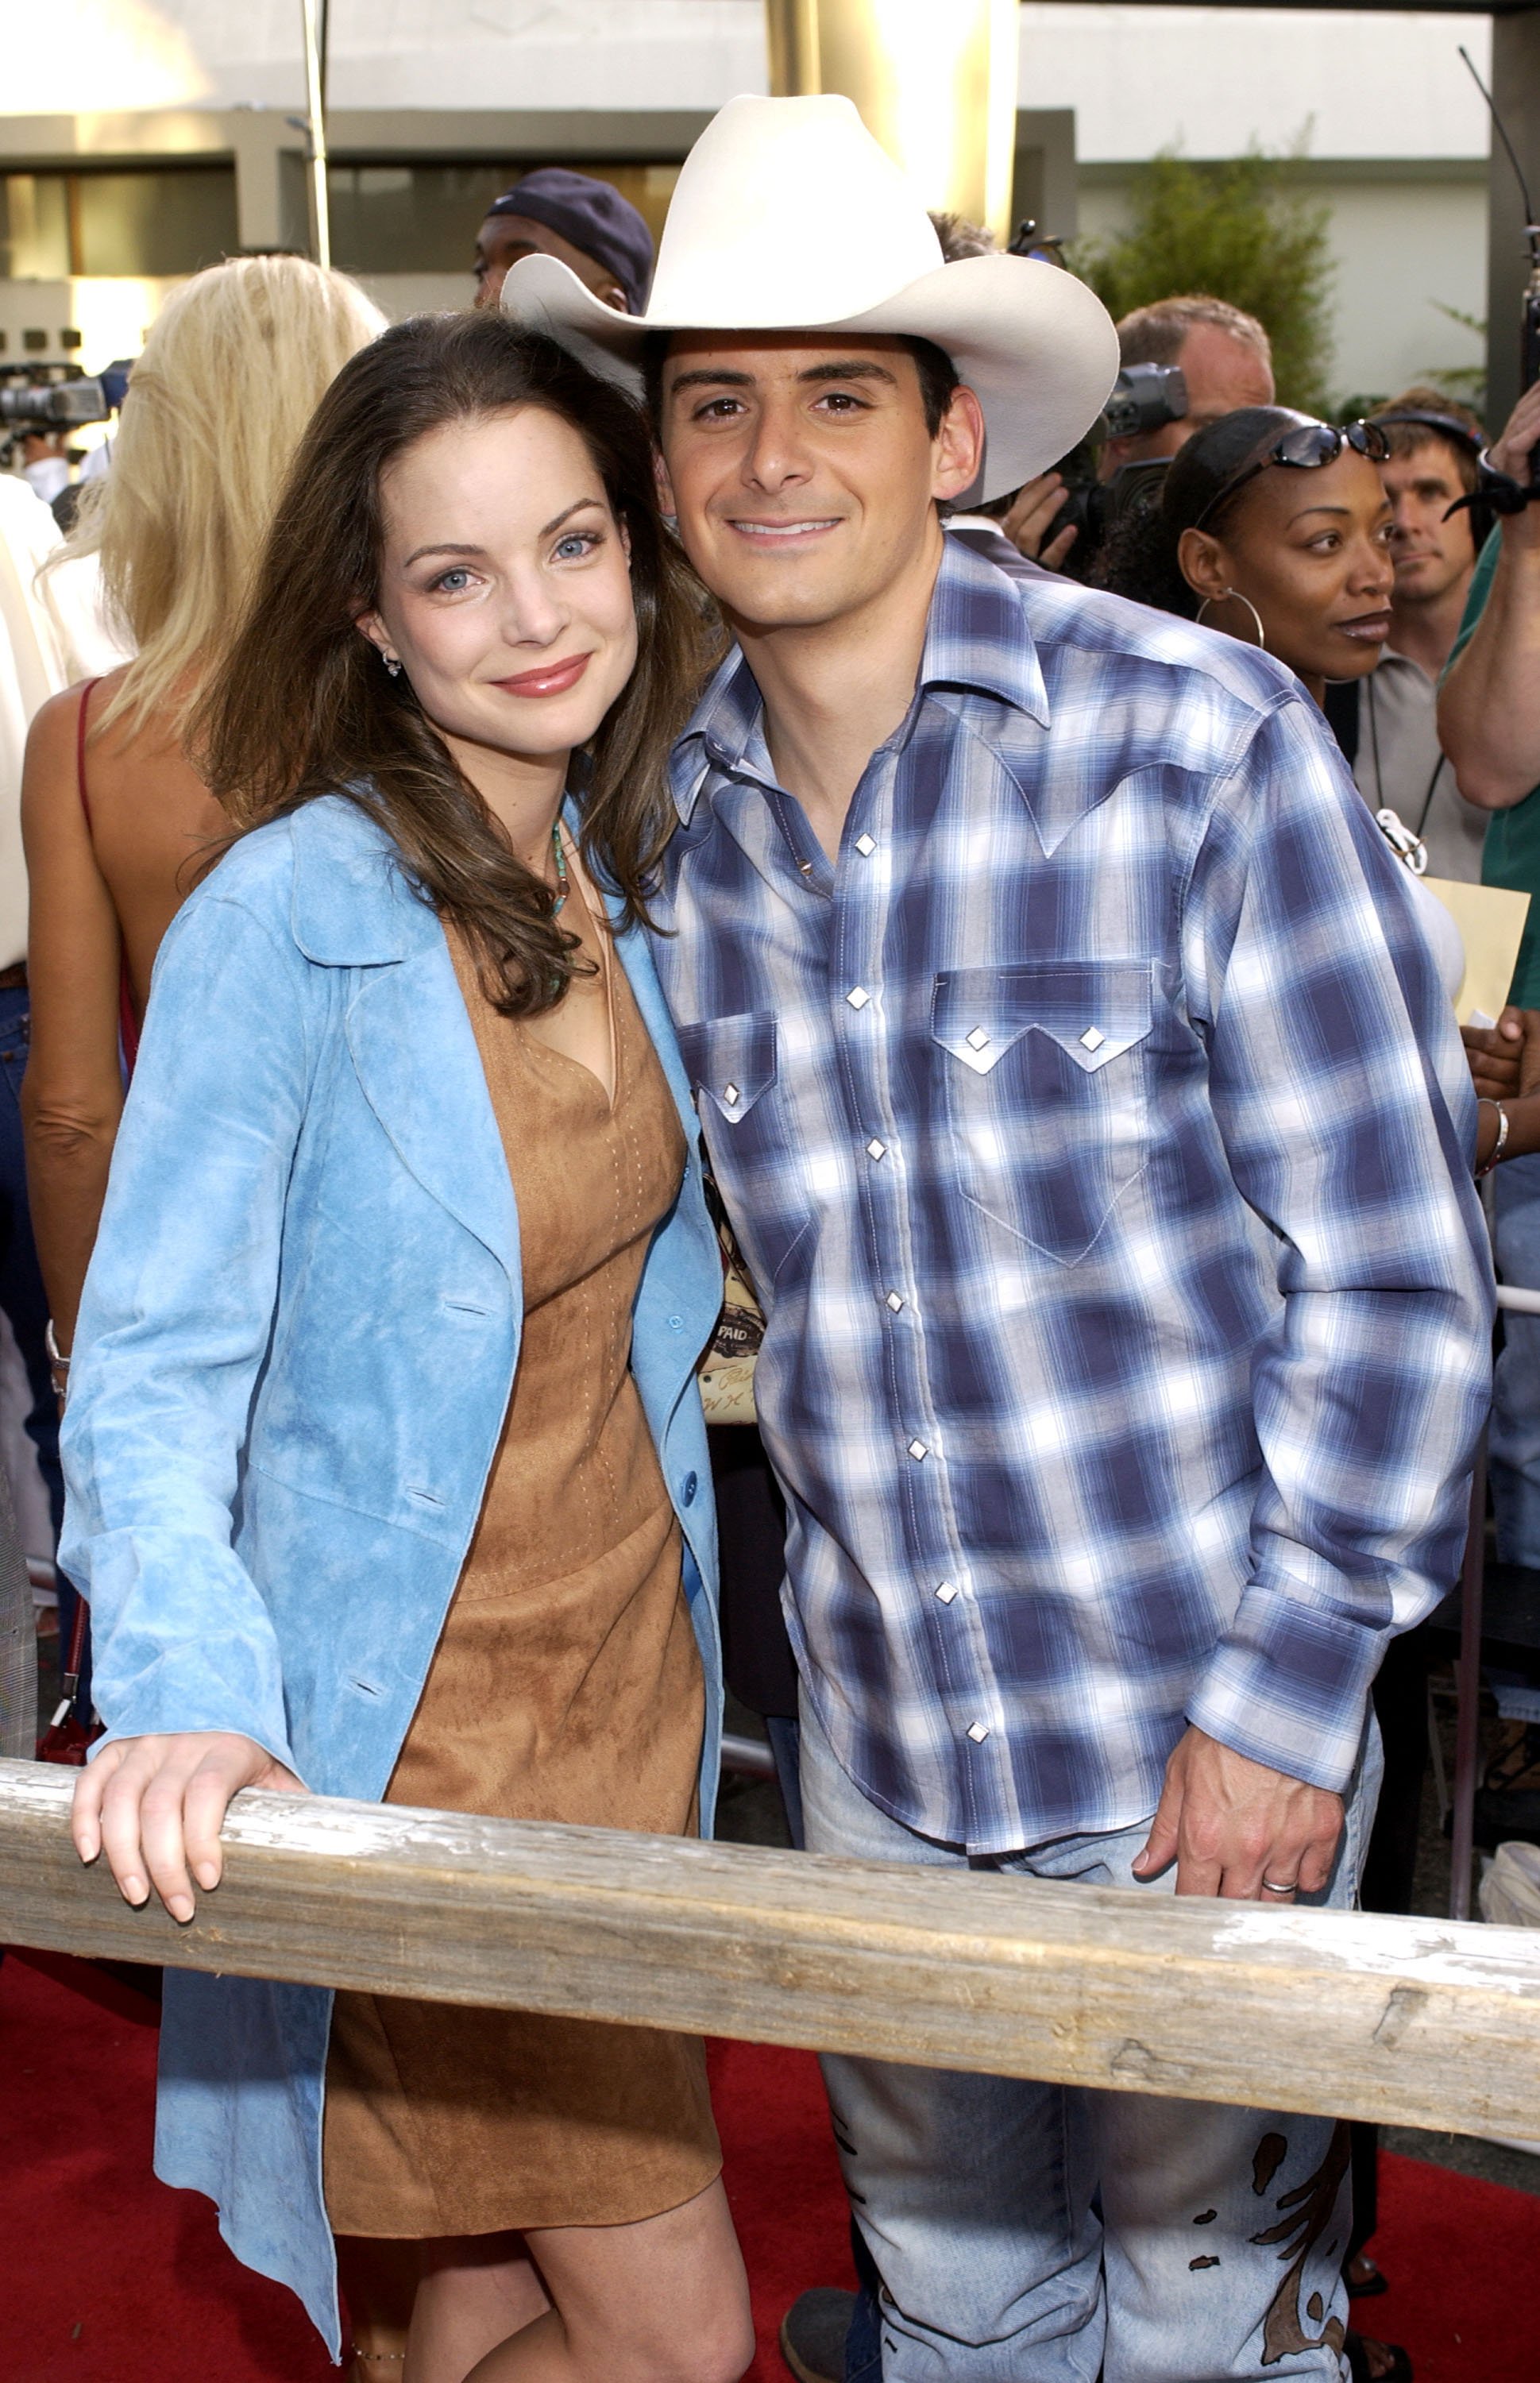 Brad and Kimberly Paisley in California 2003. | Source: Getty Images